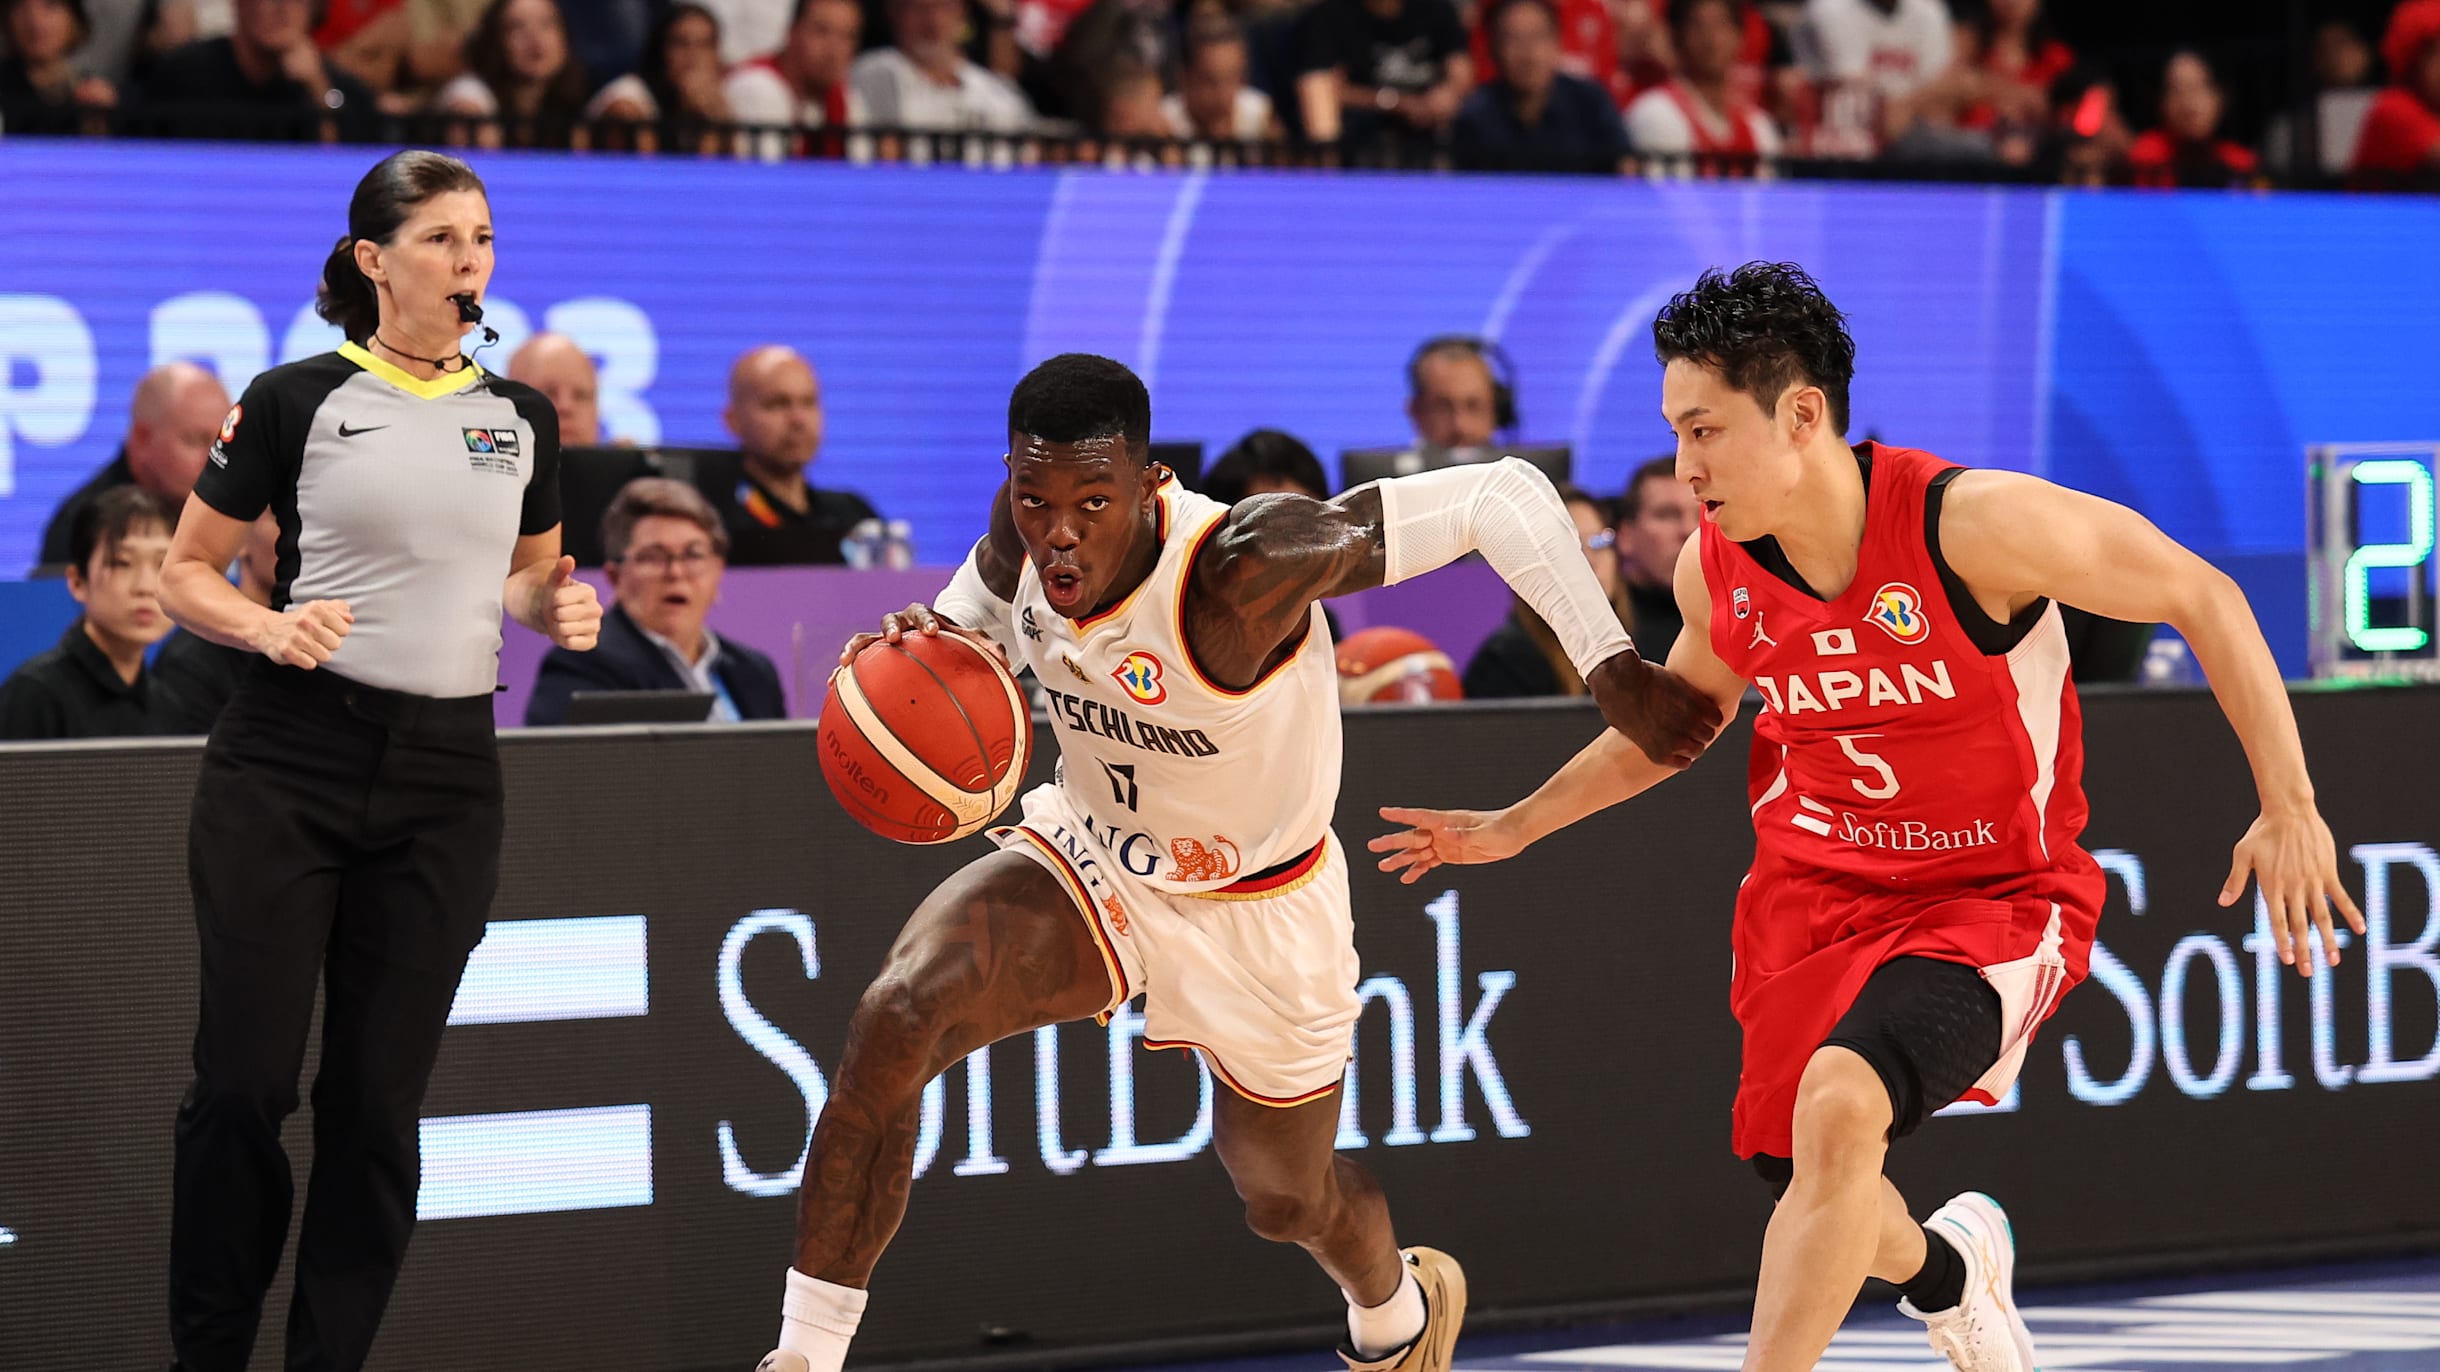 Basketball: Japan set to open World Cup against rising power Germany